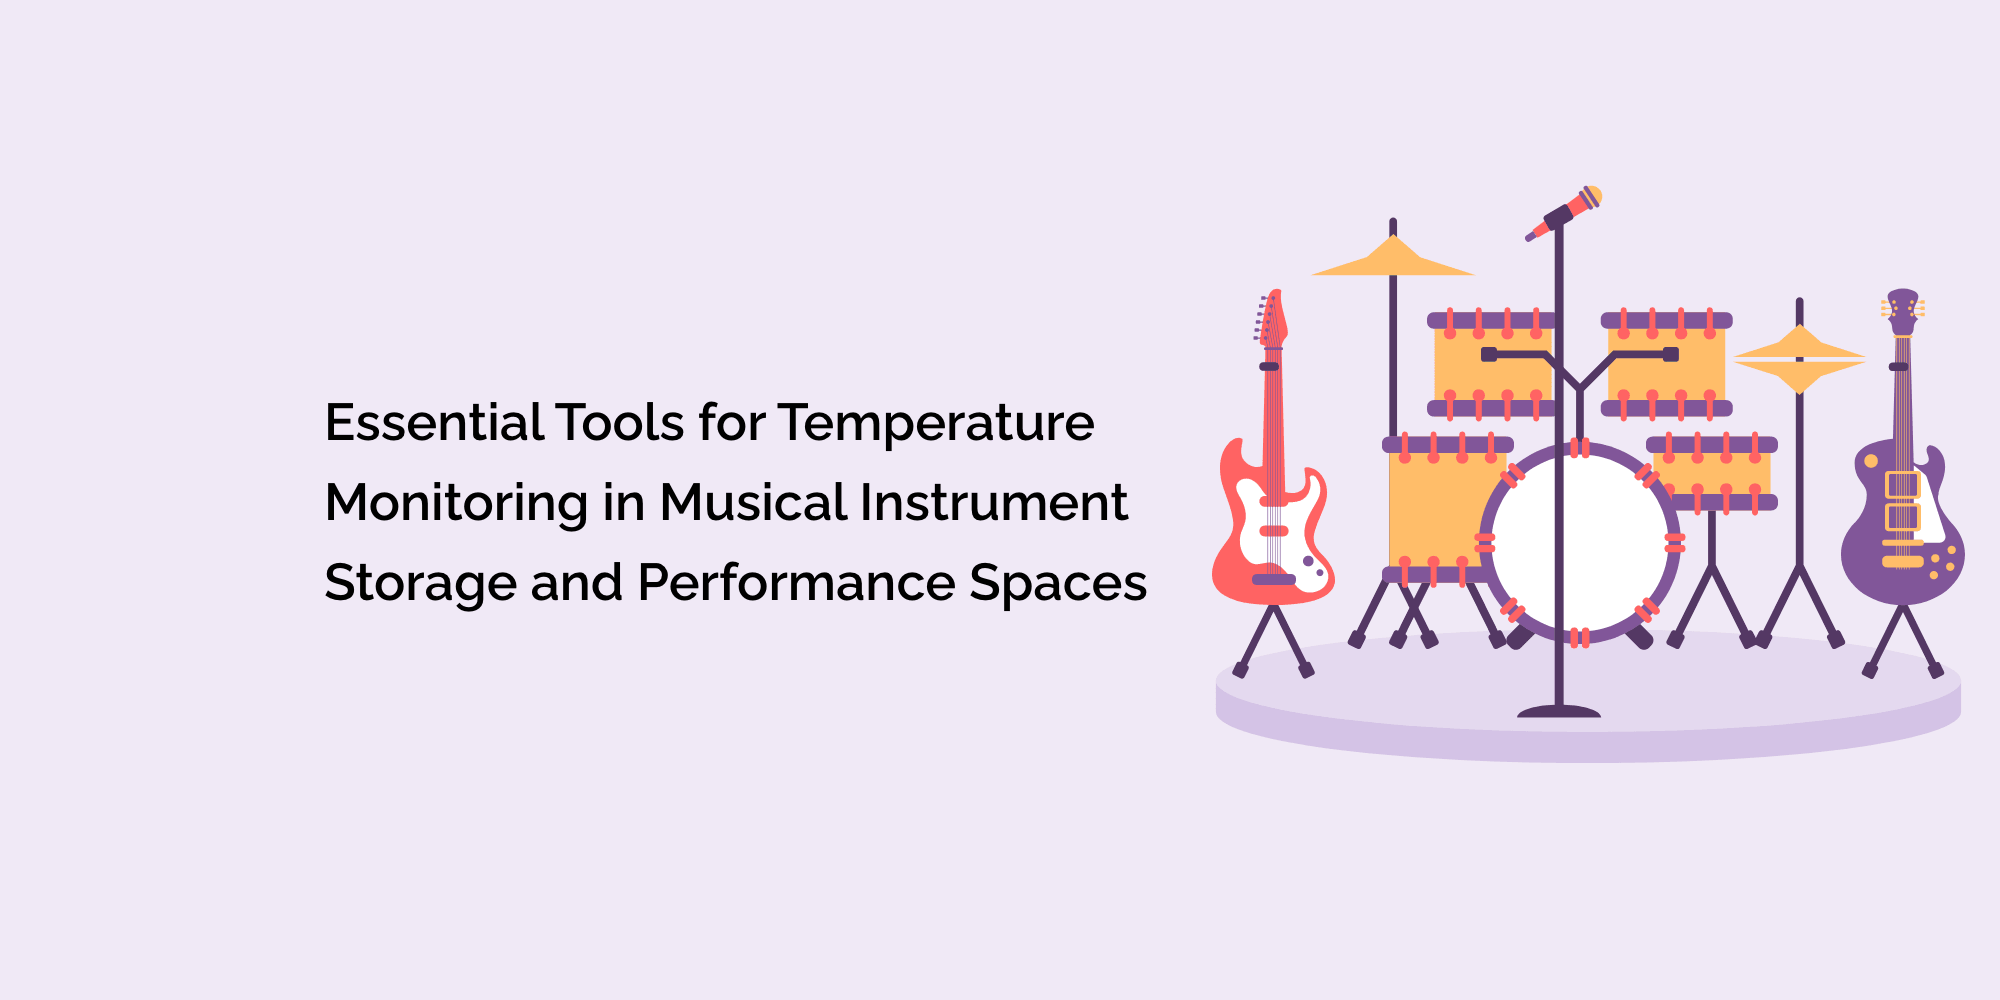 Essential Tools for Temperature Monitoring in Musical Instrument Storage and Performance Spaces